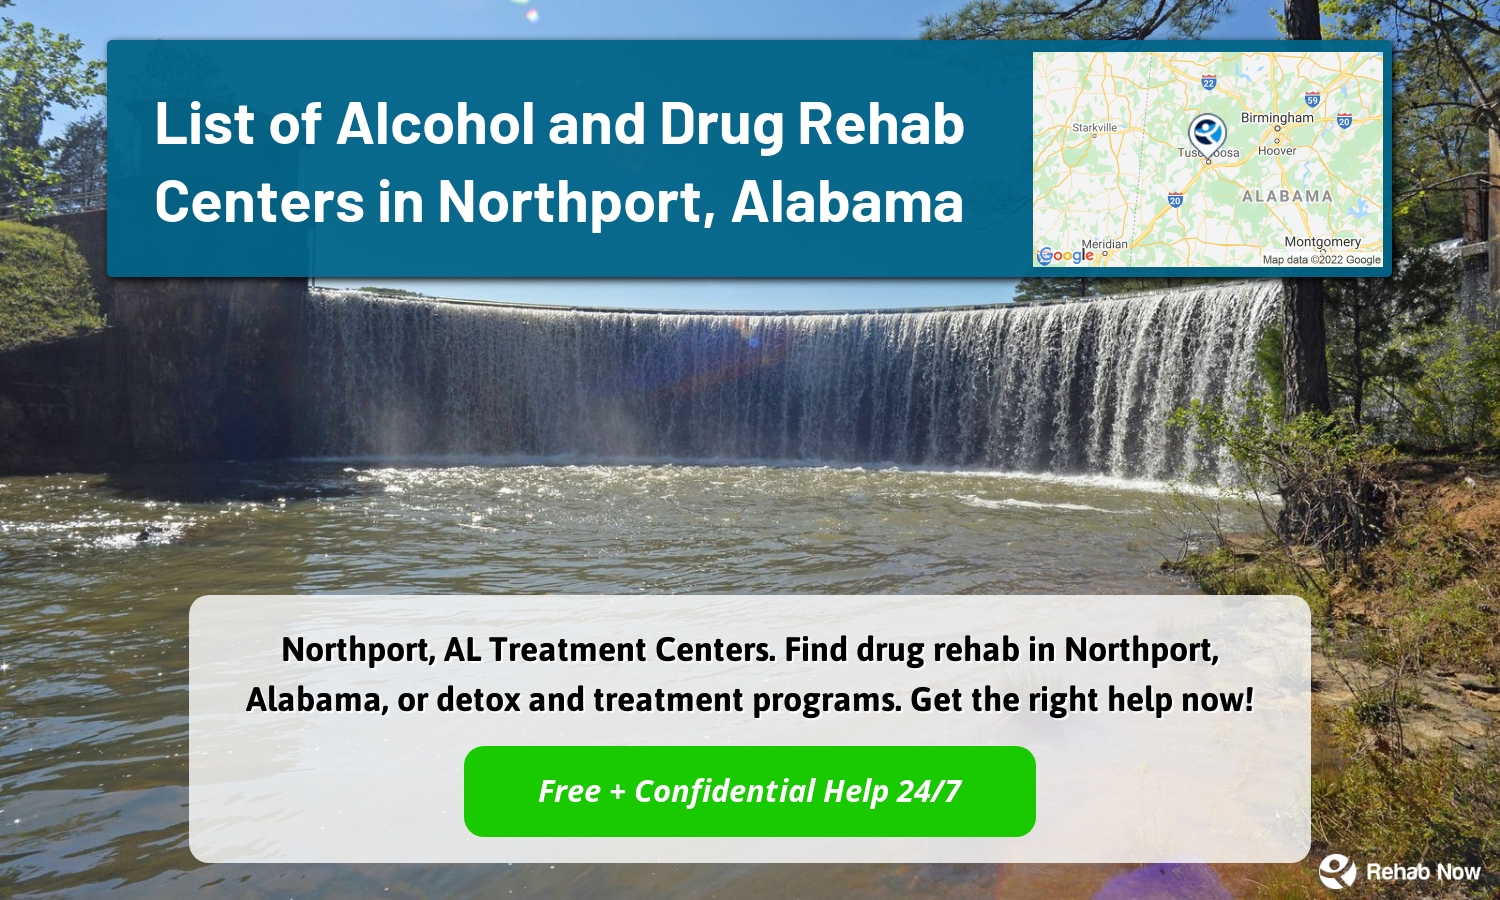 Northport, AL Treatment Centers. Find drug rehab in Northport, Alabama, or detox and treatment programs. Get the right help now!